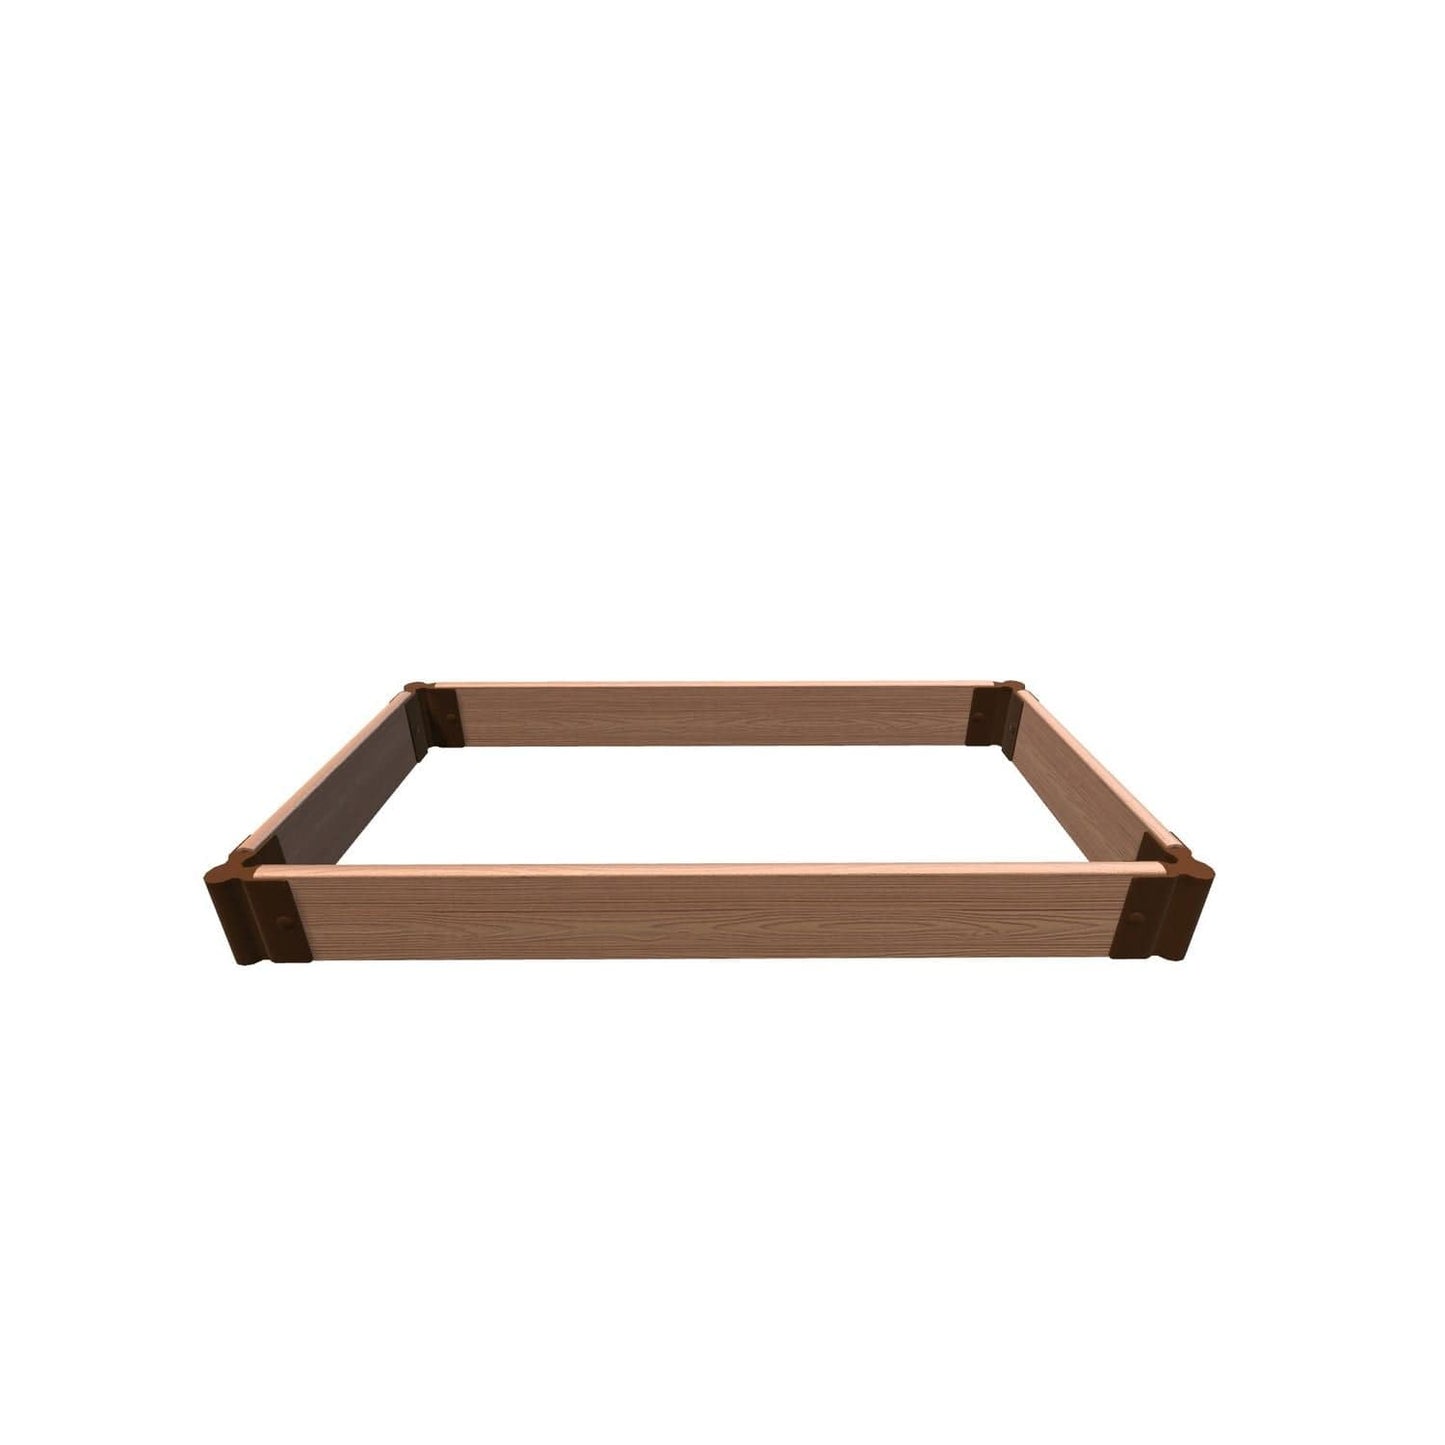 Frame It All Gardening Accessories 2" Frame It All | Tool-Free Classic Sienna Raised Garden Bed 4' X 4' X 5.5” 300001080